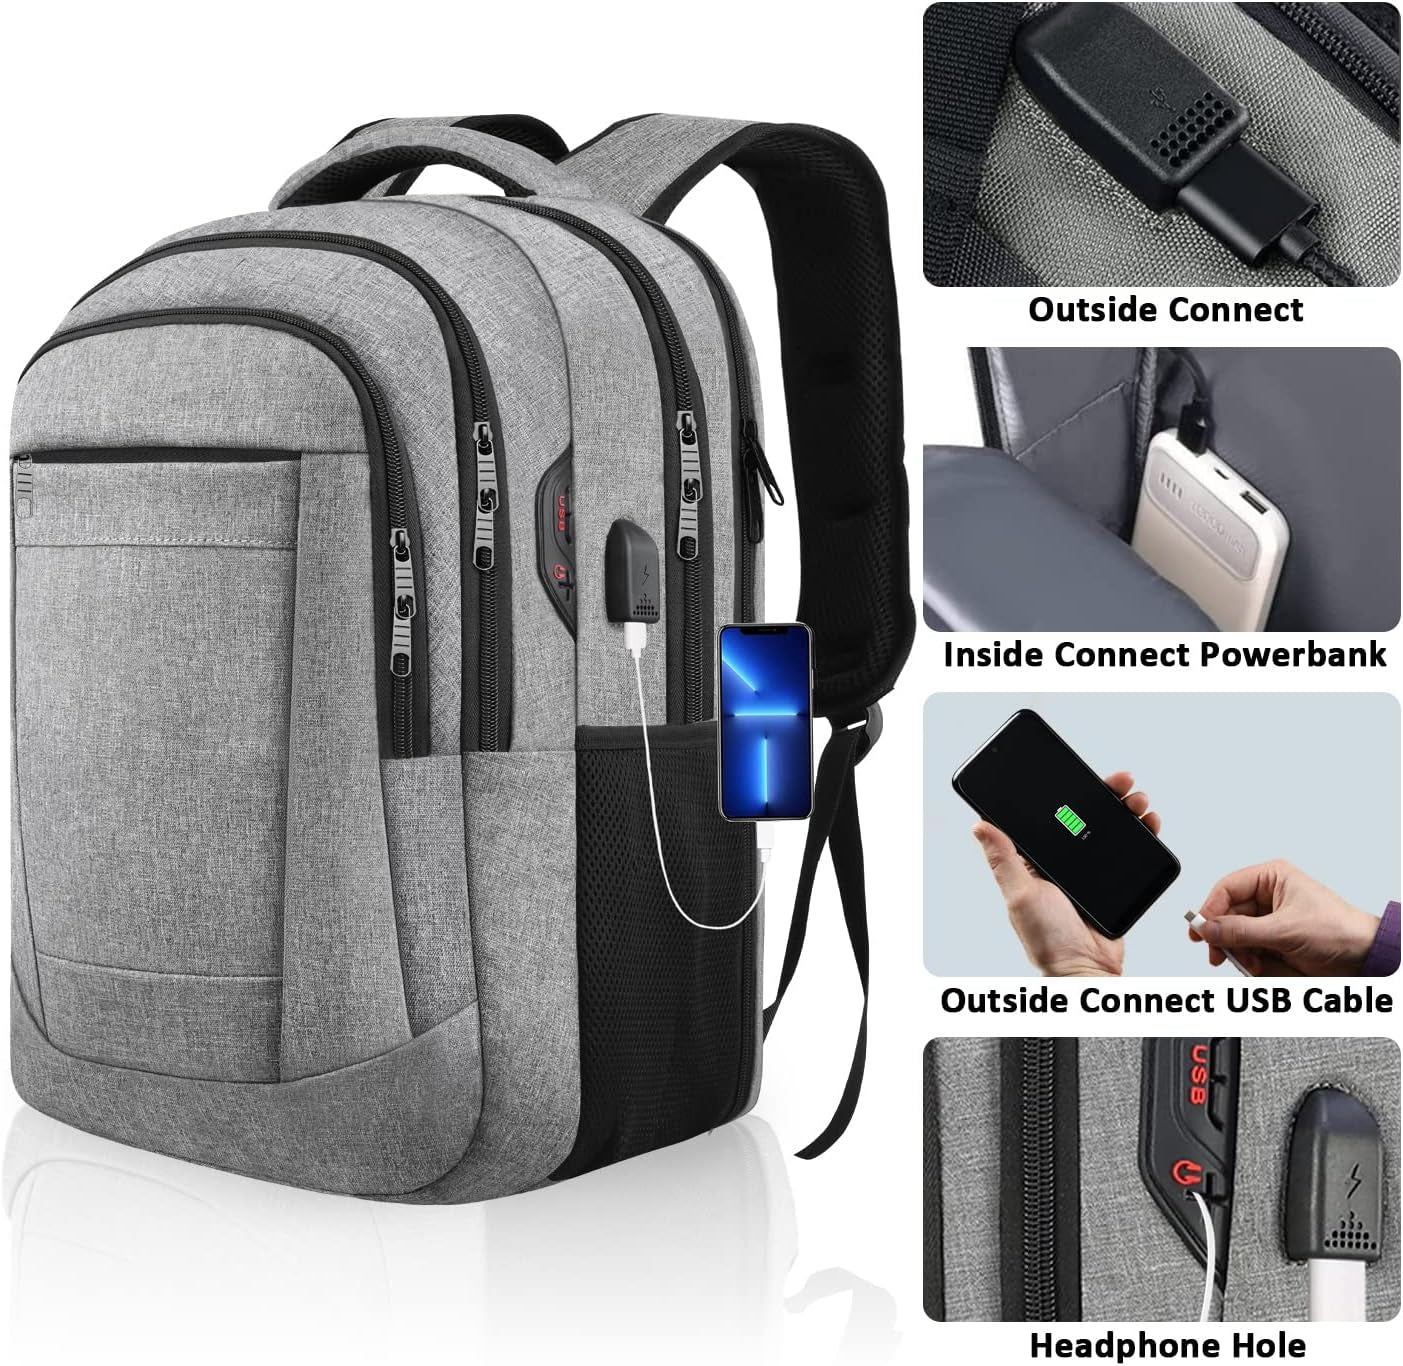 TSA Approved Large Travel Backpack, Waterproof Anti-Theft Business College Computer Bag  Fits 15.6 Inch Laptop, USB Charging Port, Headphone Hole,- Grey